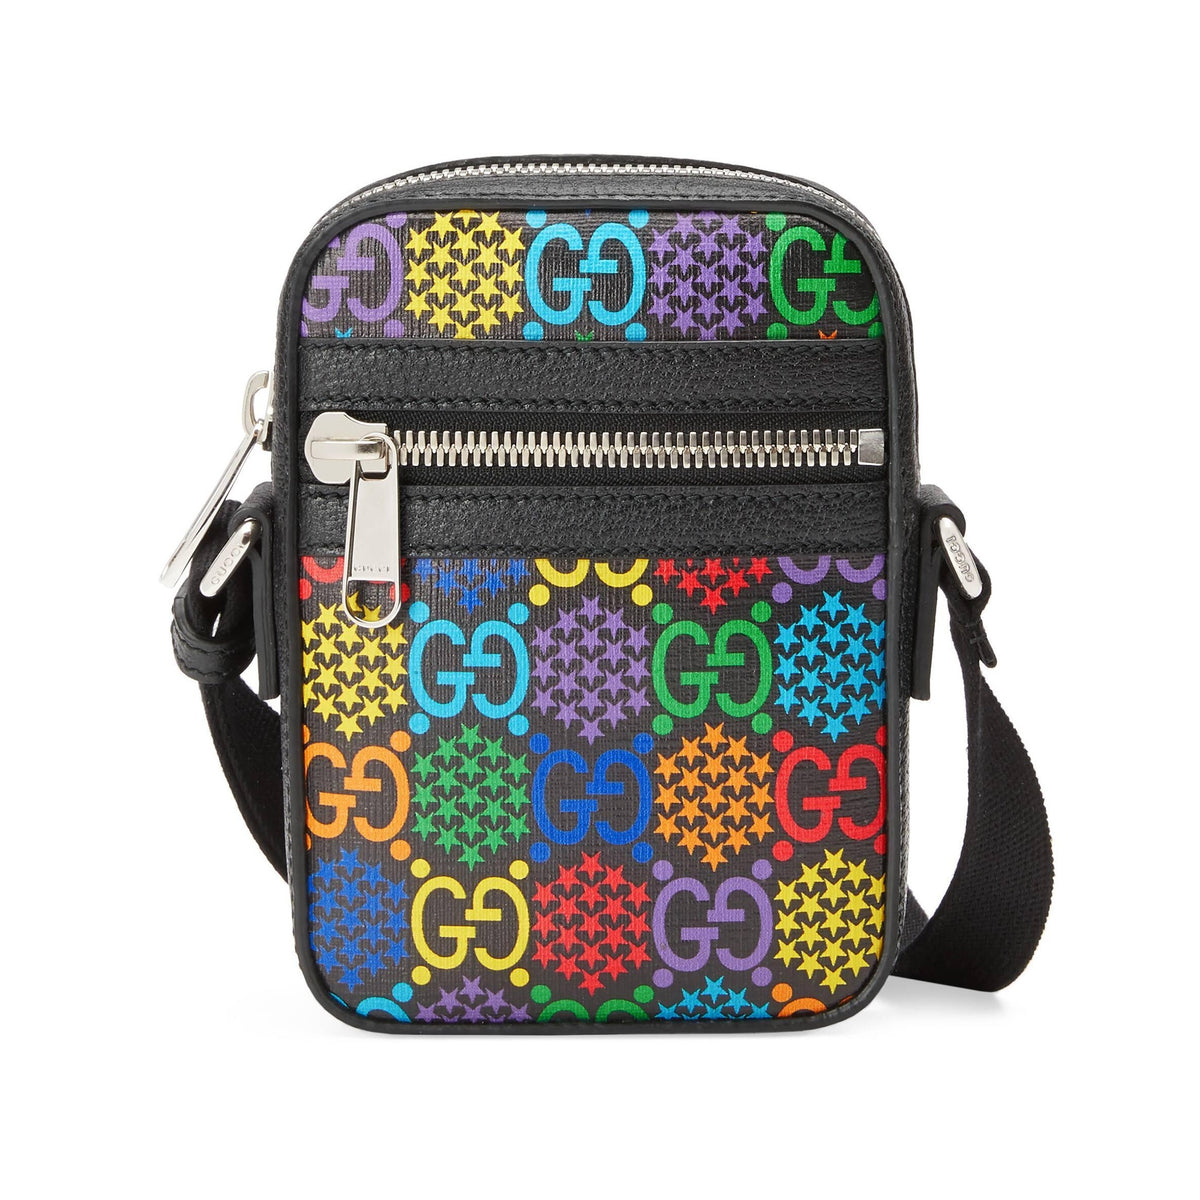 Gucci Psychedelic Supreme Canvas Messenger Bag in Pink –